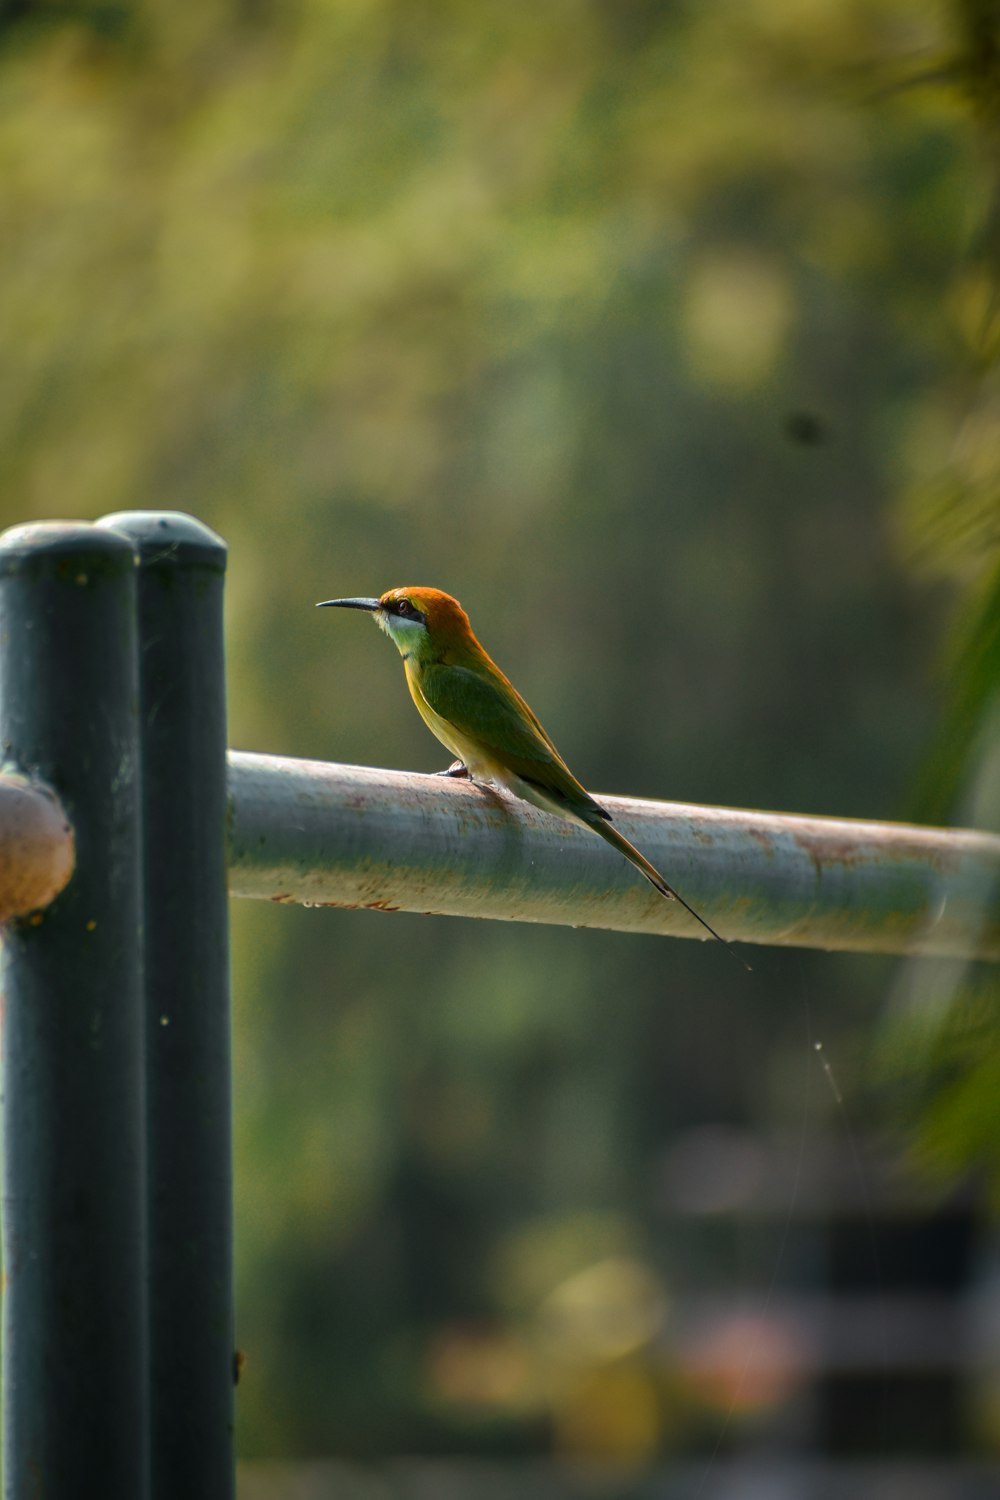 a small bird perched on top of a metal fence